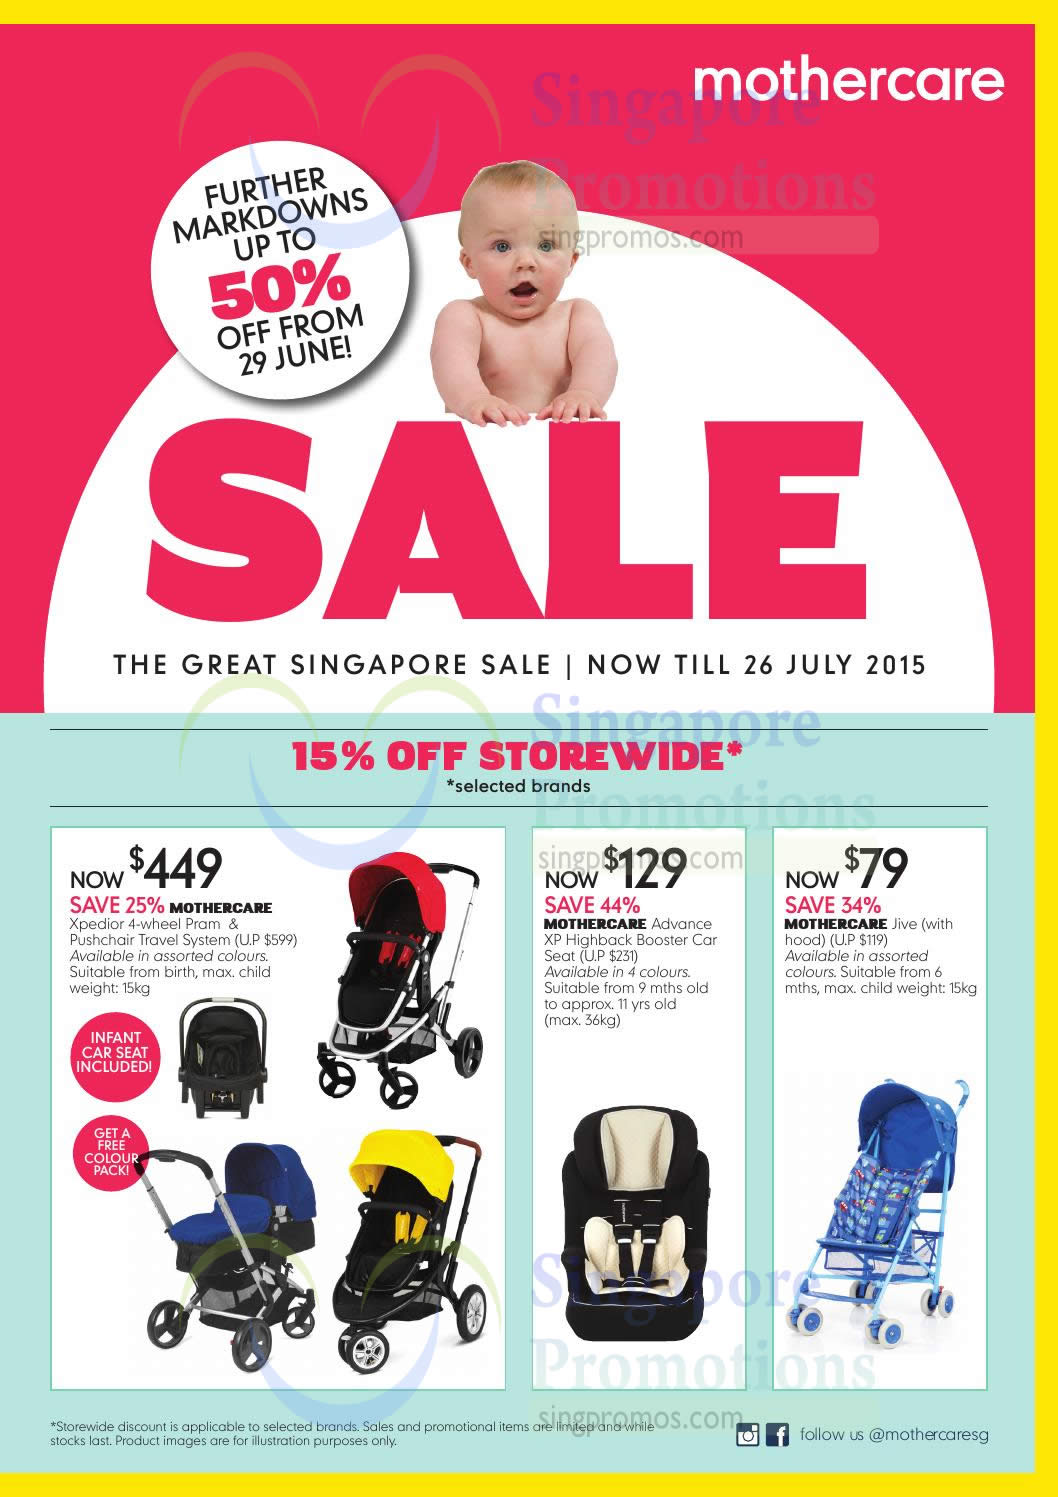 Featured image for Mothercare Up To 50% Off Further Markdowns Sale 30 Jun - 26 Jul 2015